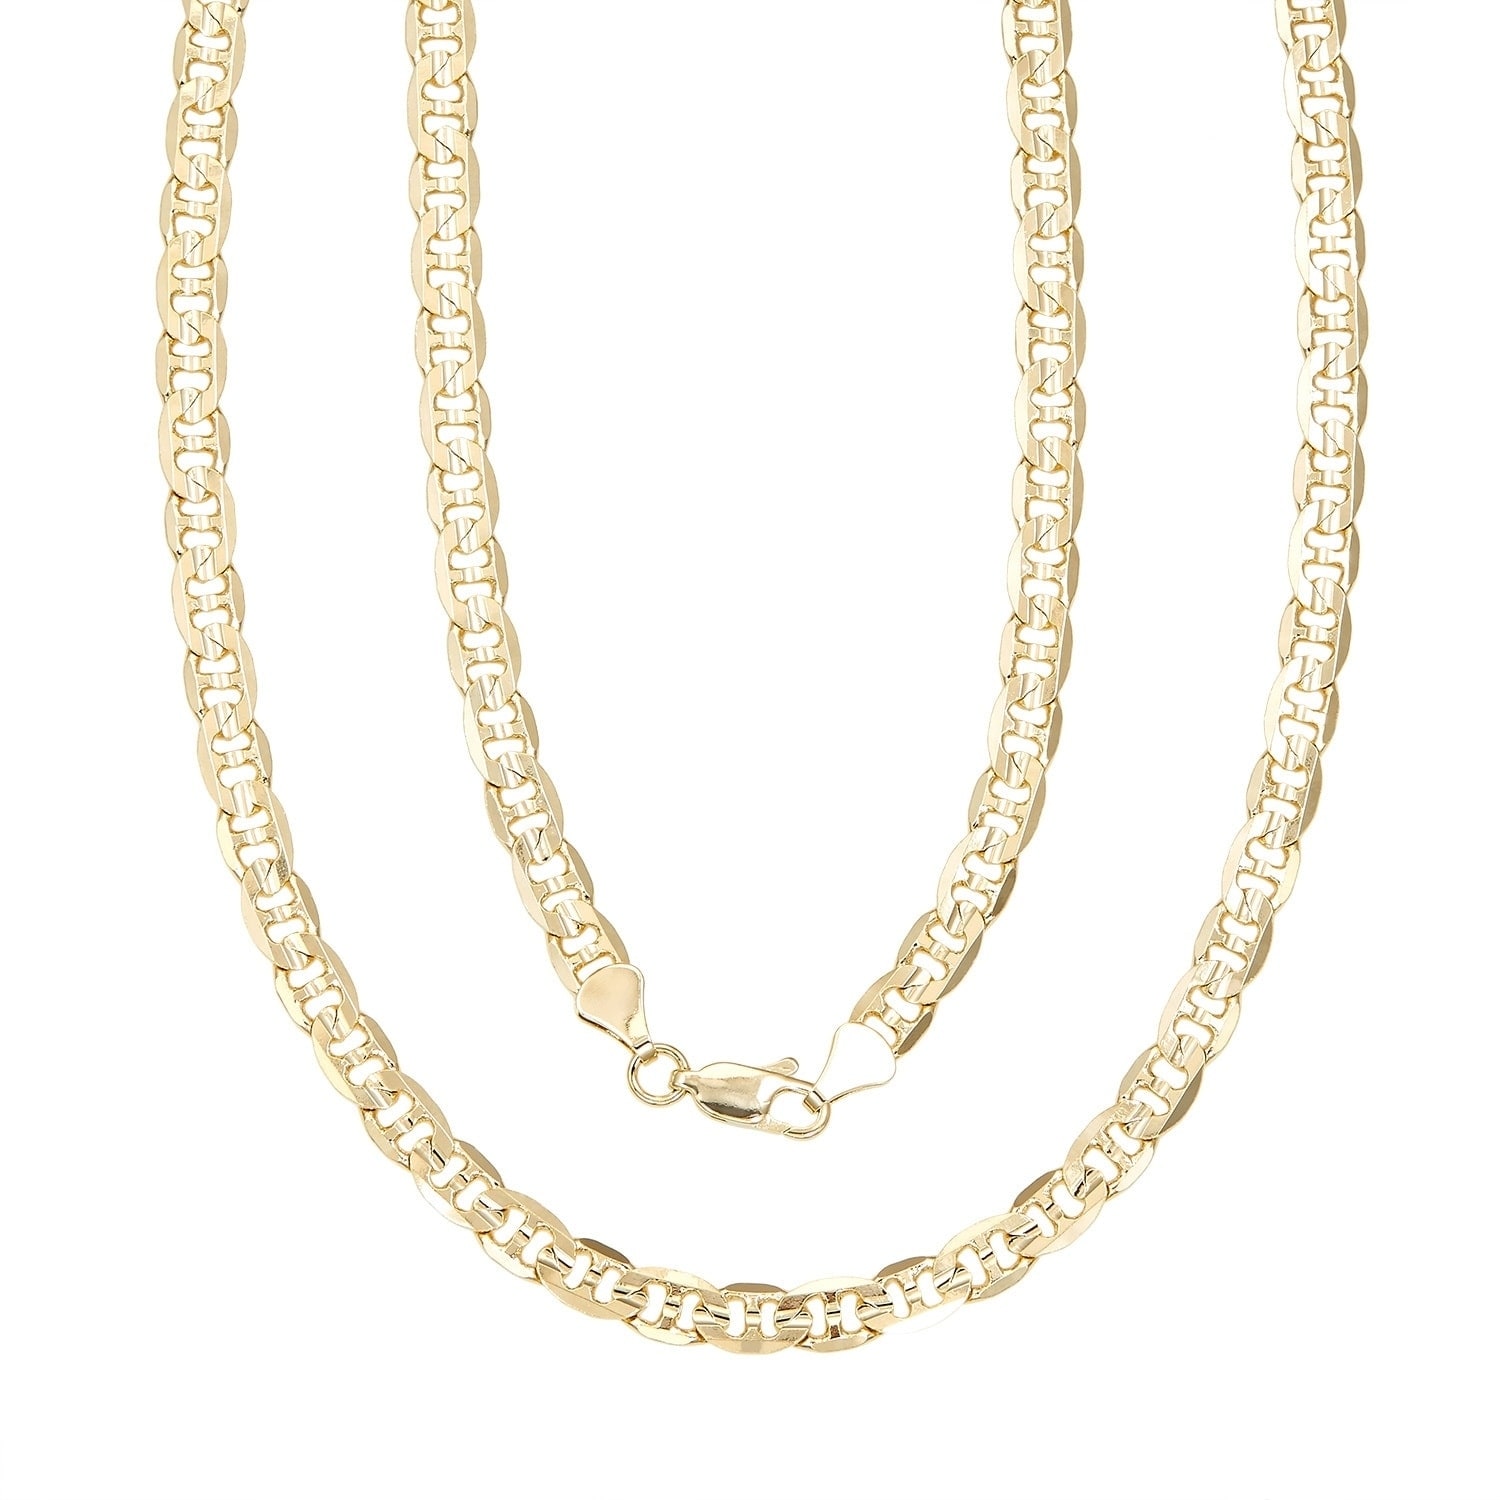 gucci style gold chain